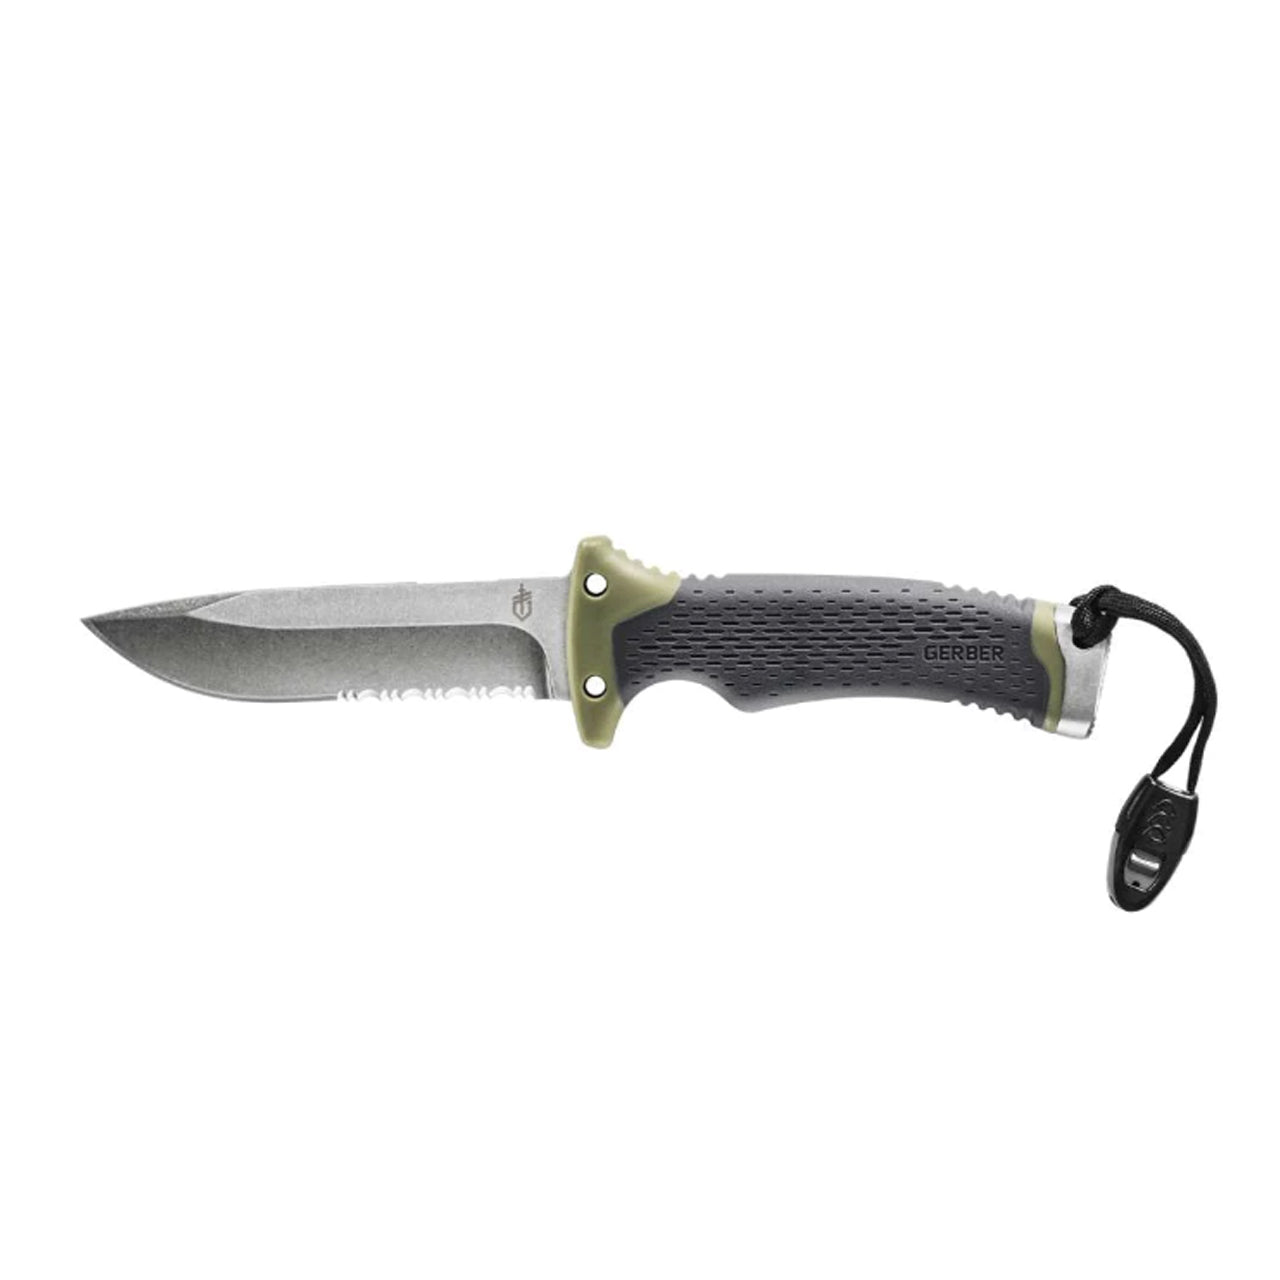 Experience outdoor life in confidence with the Gerber Ultimate Survival Knife. Loaded with features, innovations and versatility, this one-stop-shop knife has everything you need to take on the great outdoors. Perfect for hobbyists and adventurers alike, this is the only knife you need for your ultimate wilderness journey. www.moralepatches.com.au